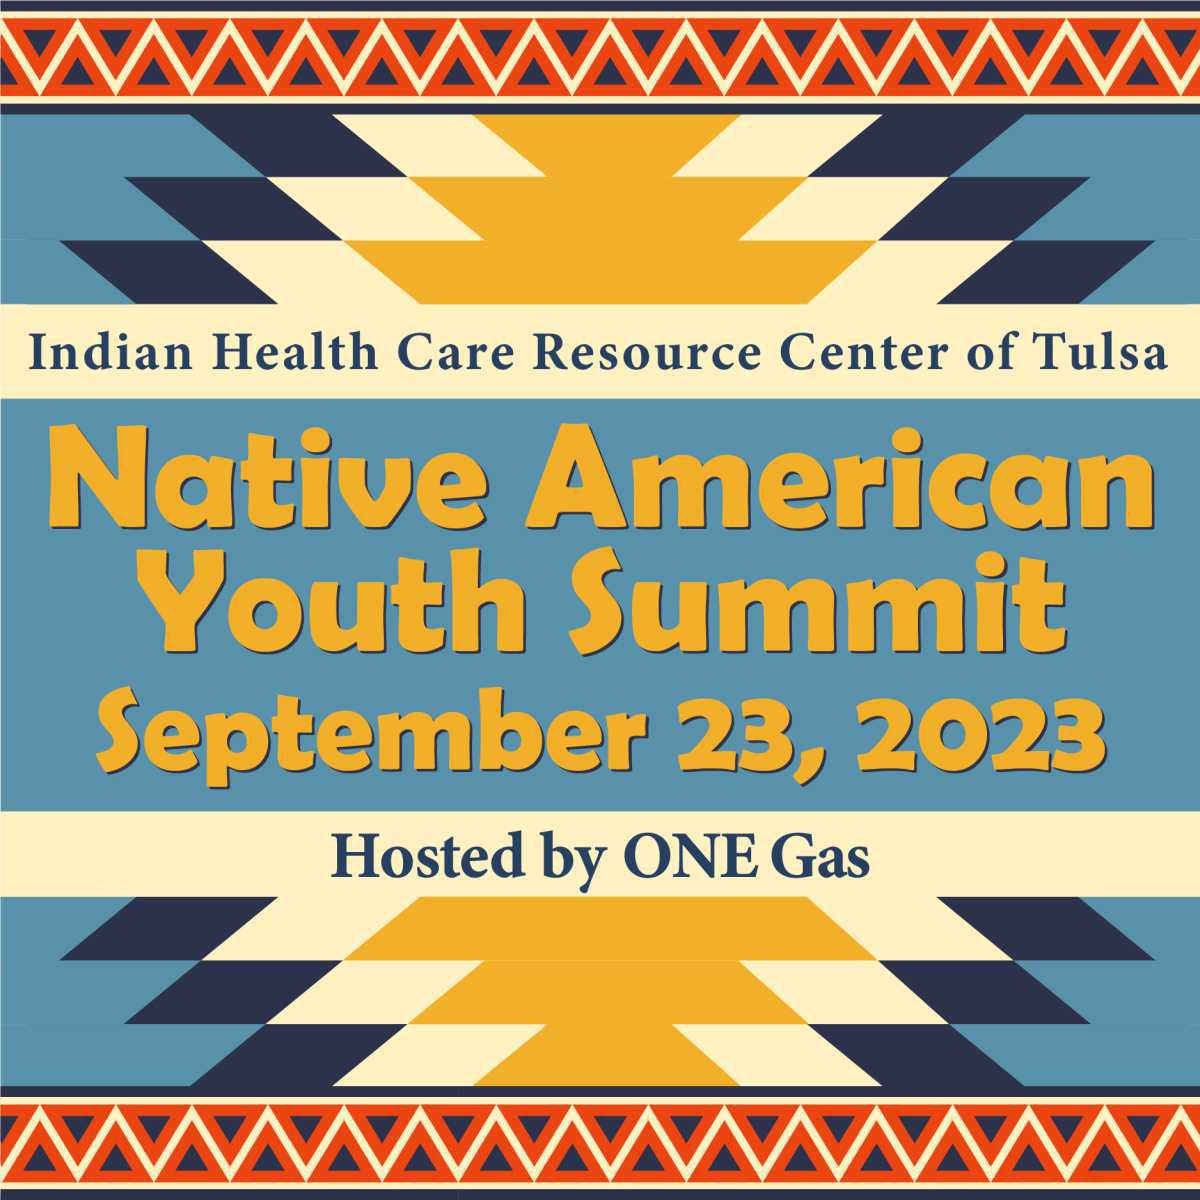 Native American Youth Summit